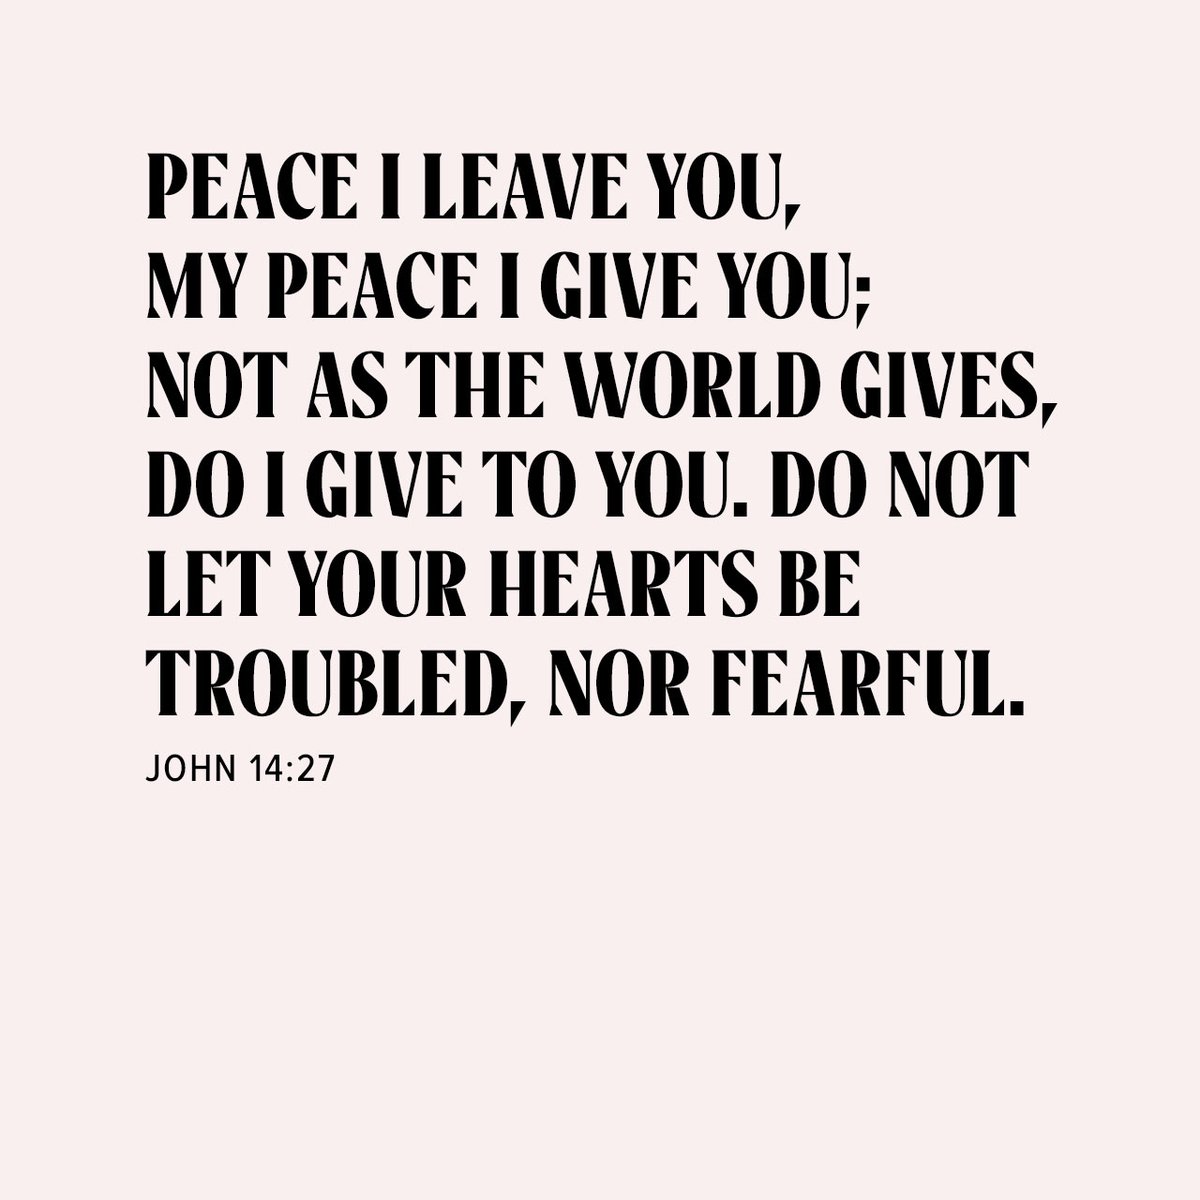 May the troubles of the world and all you're facing not steal your inner peace. Remember, our Lord and Savior provides a peace this world will never and can never give us.